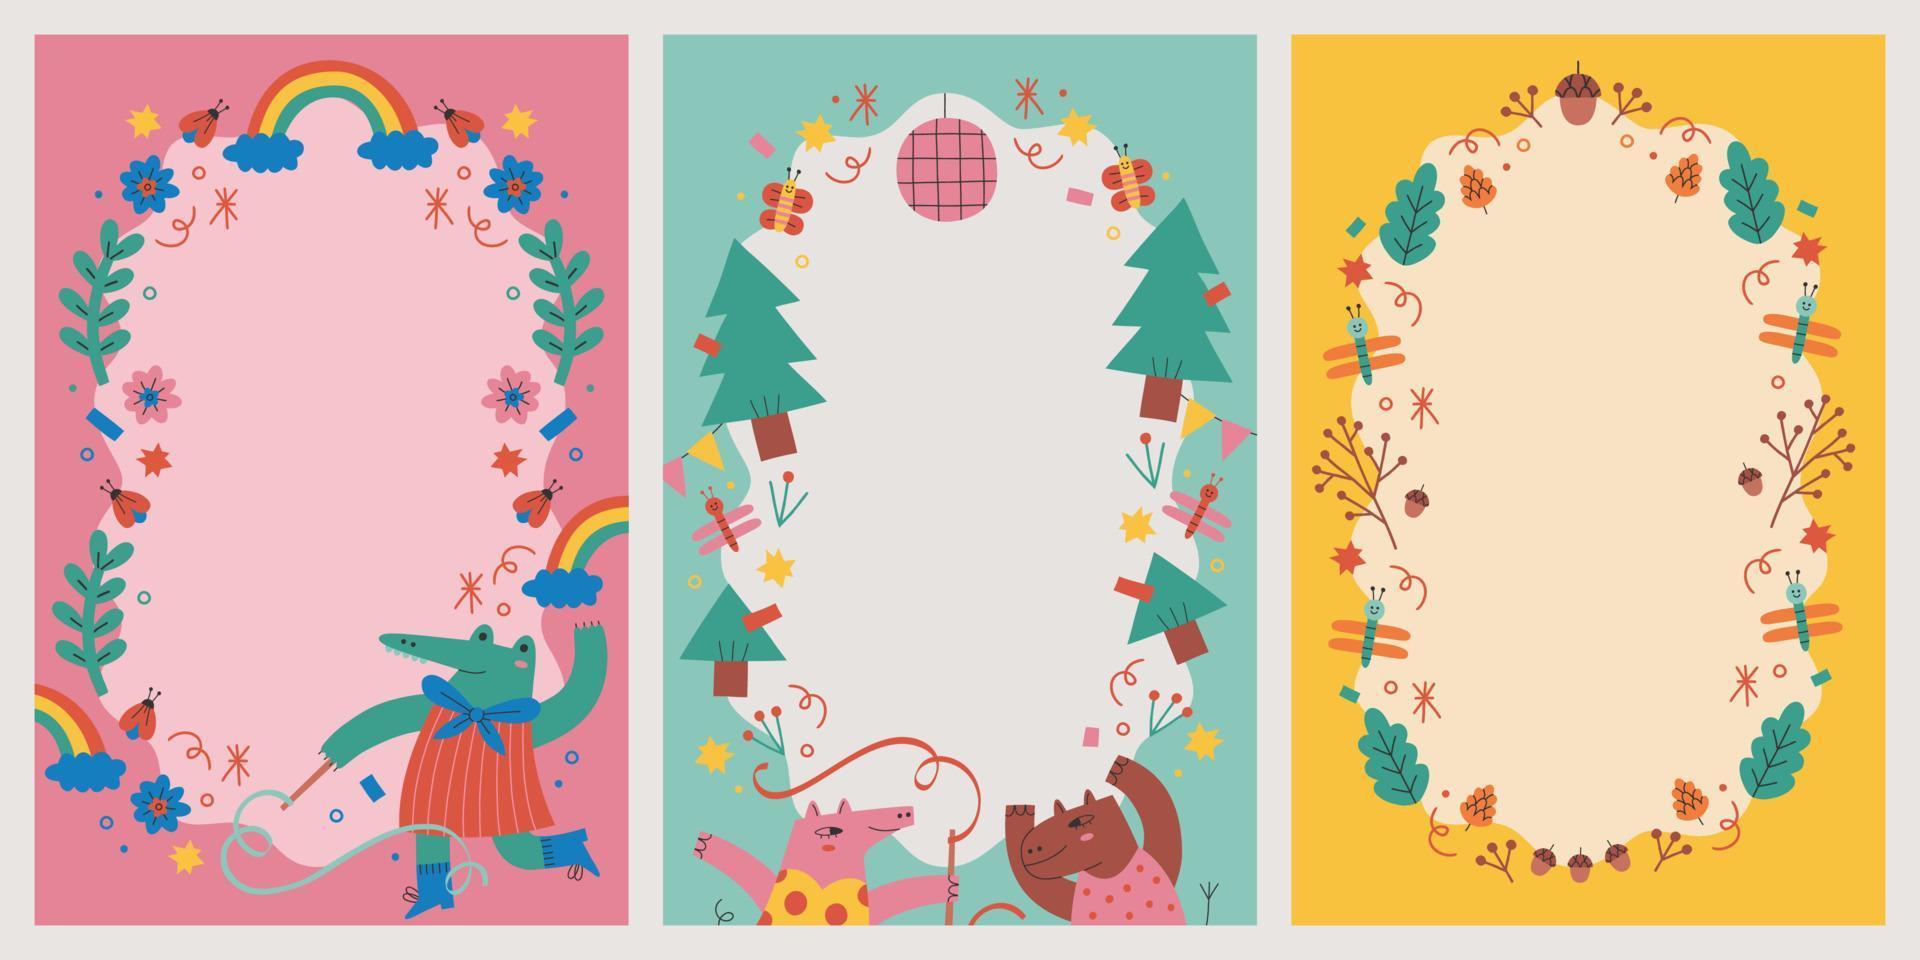 Set of children memo scrapbook and notes animal forest wreath templates vector